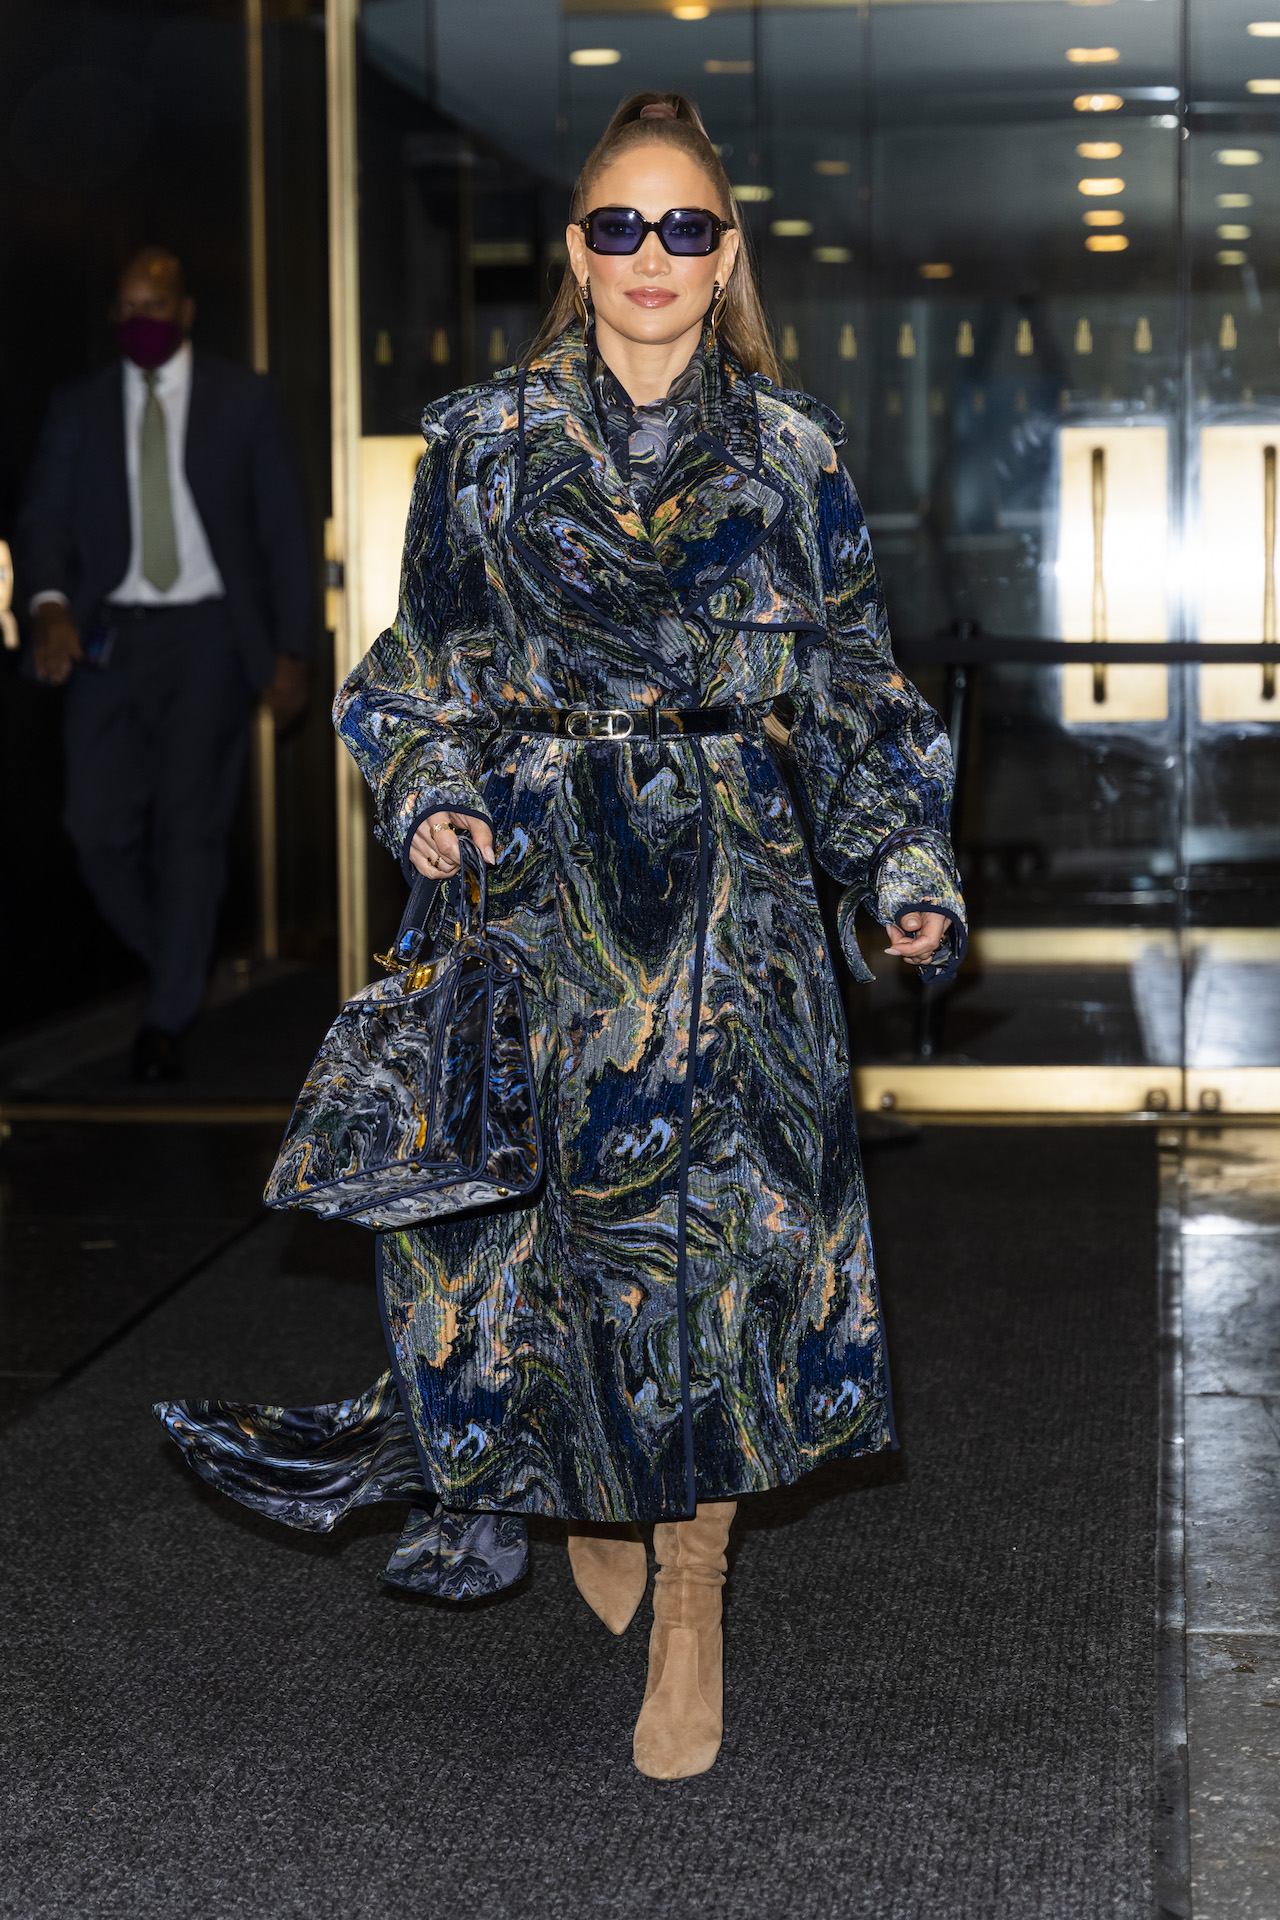 Jennifer Lopez Packed the Most Stylish Coats for N.Y.C. Press Day